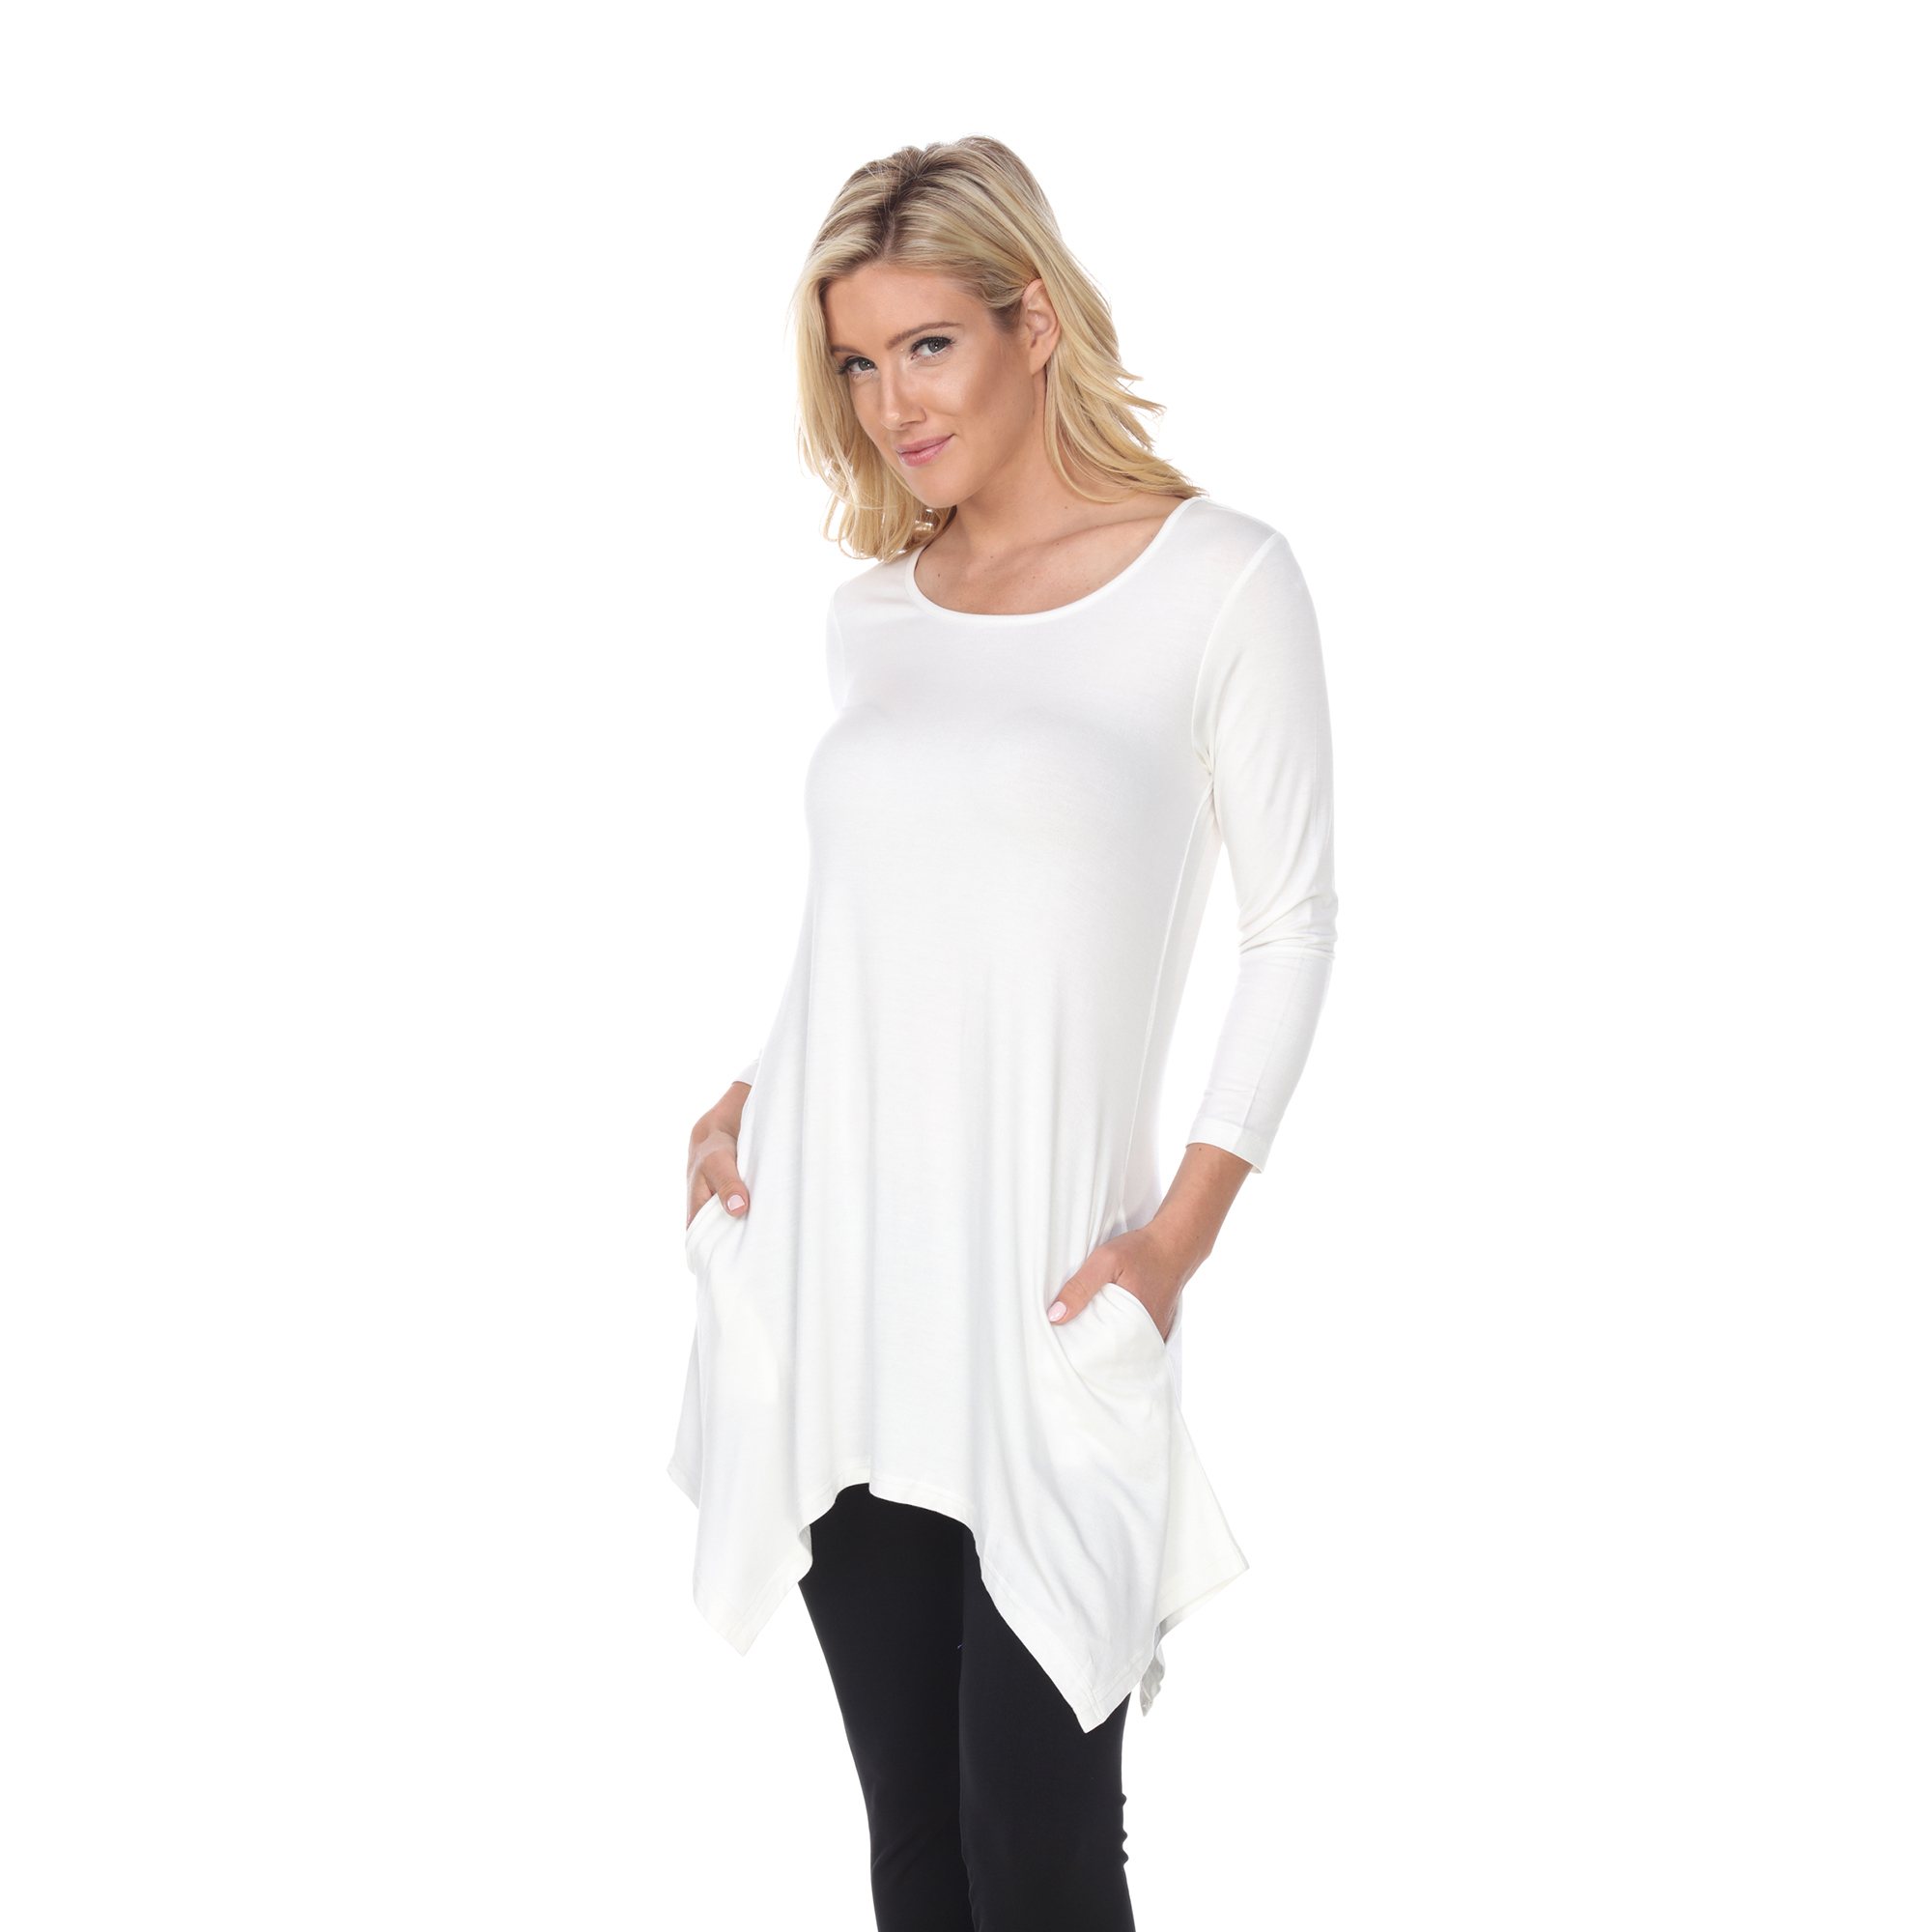 White Mark Women's Quarter Sleeve Tunic Top With Pockets - White, Large